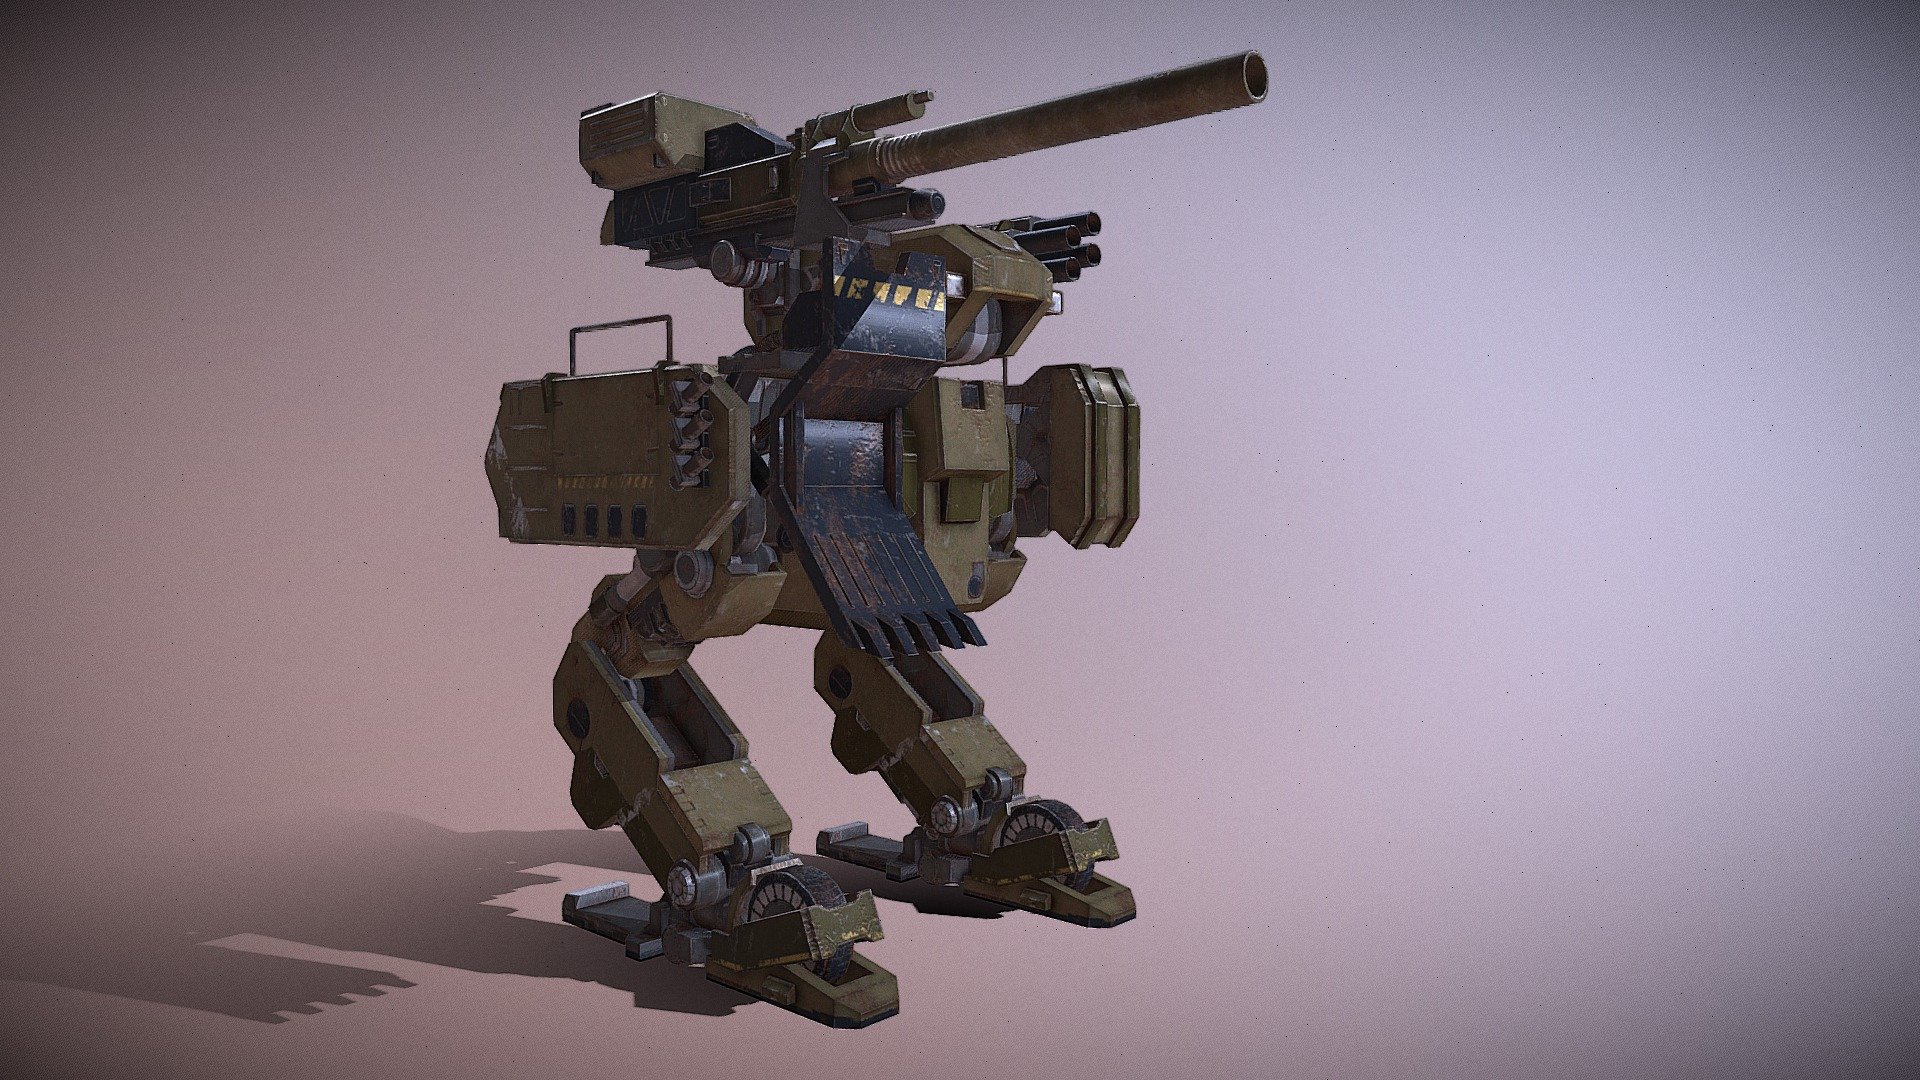 Rigged sci fi War robot
low poly 3d model
fbx file format - War Mech Rigged - Buy Royalty Free 3D model by aaokiji 3d model